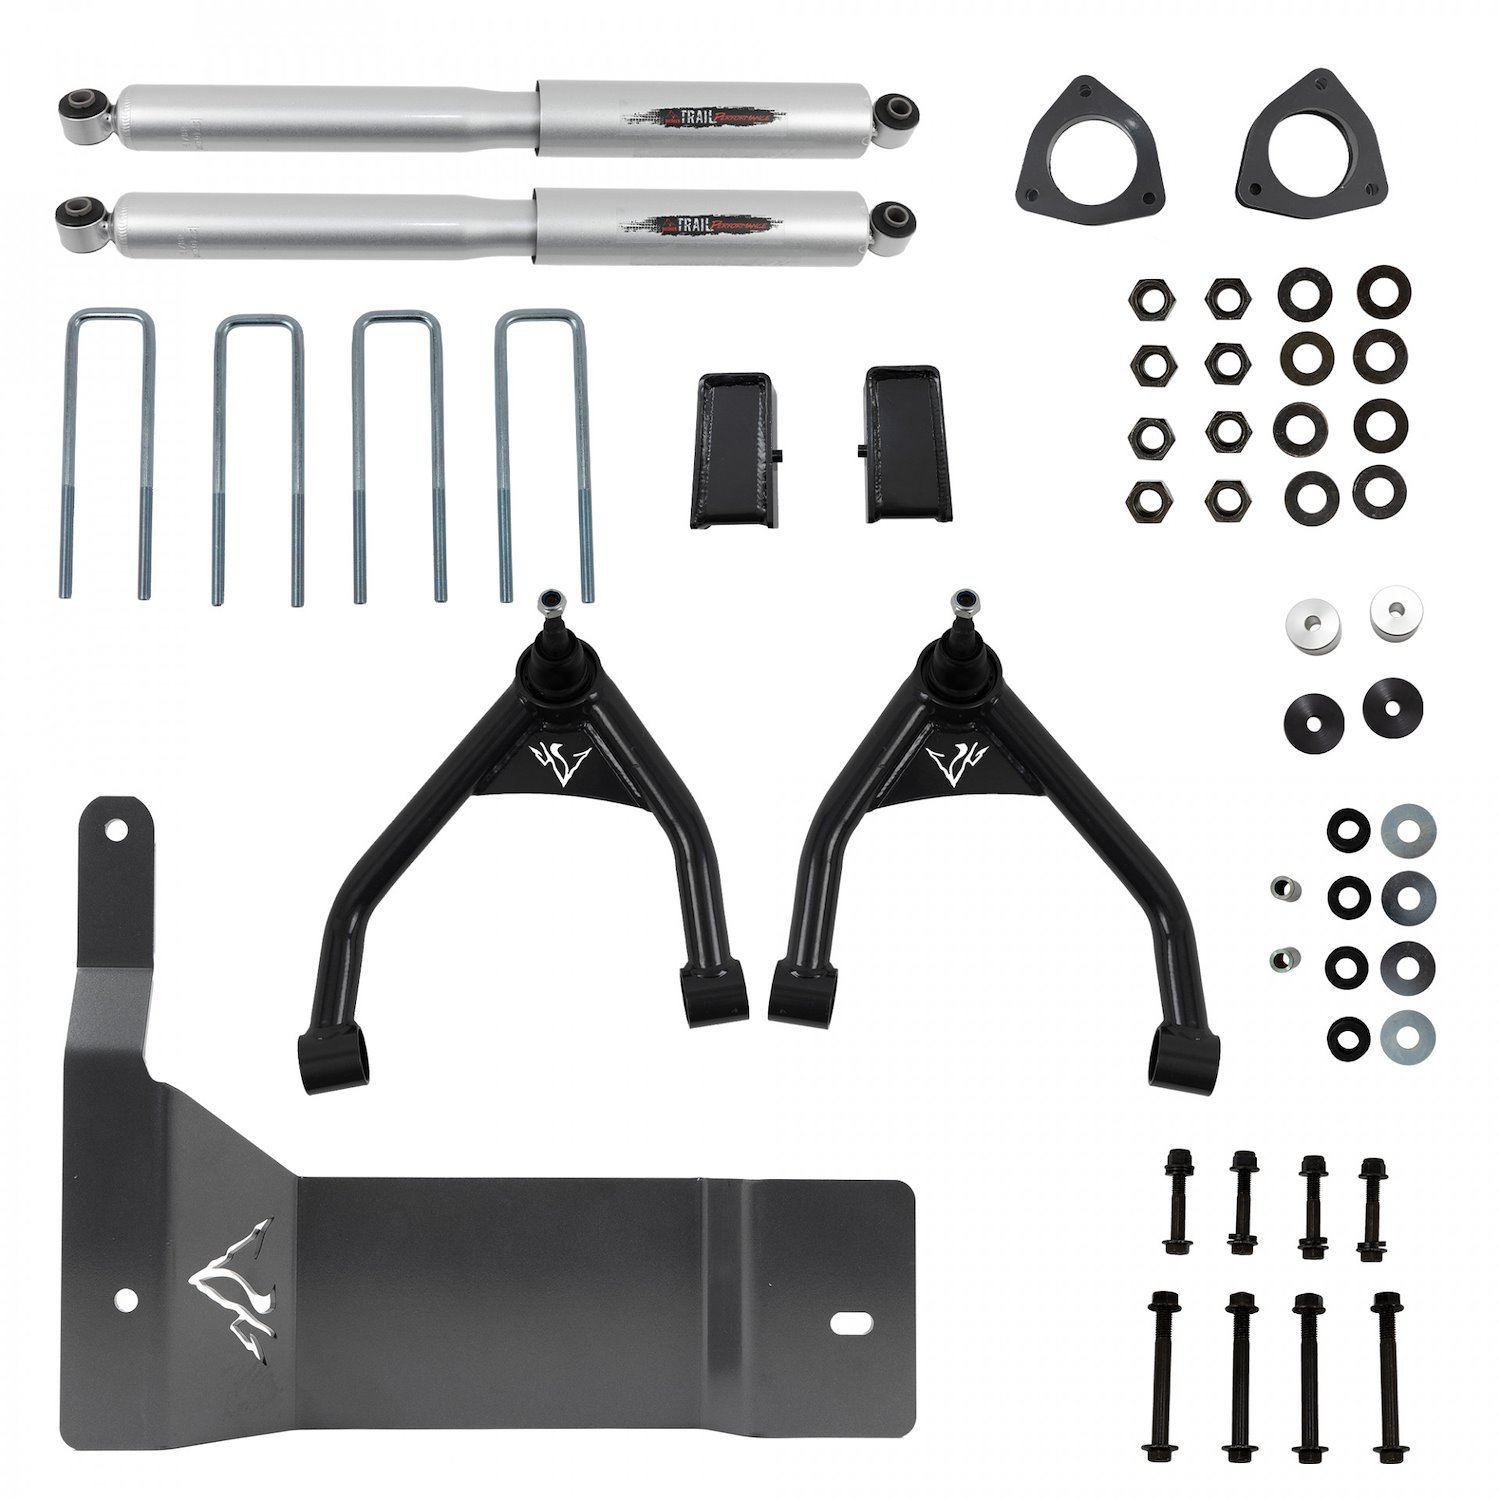 4 in. Suspension Lift Kit for 2007-2013 Chevy Silverado, GMC Sierra 1500 Truck 4WD/RWD (Crew/Extended Cab)